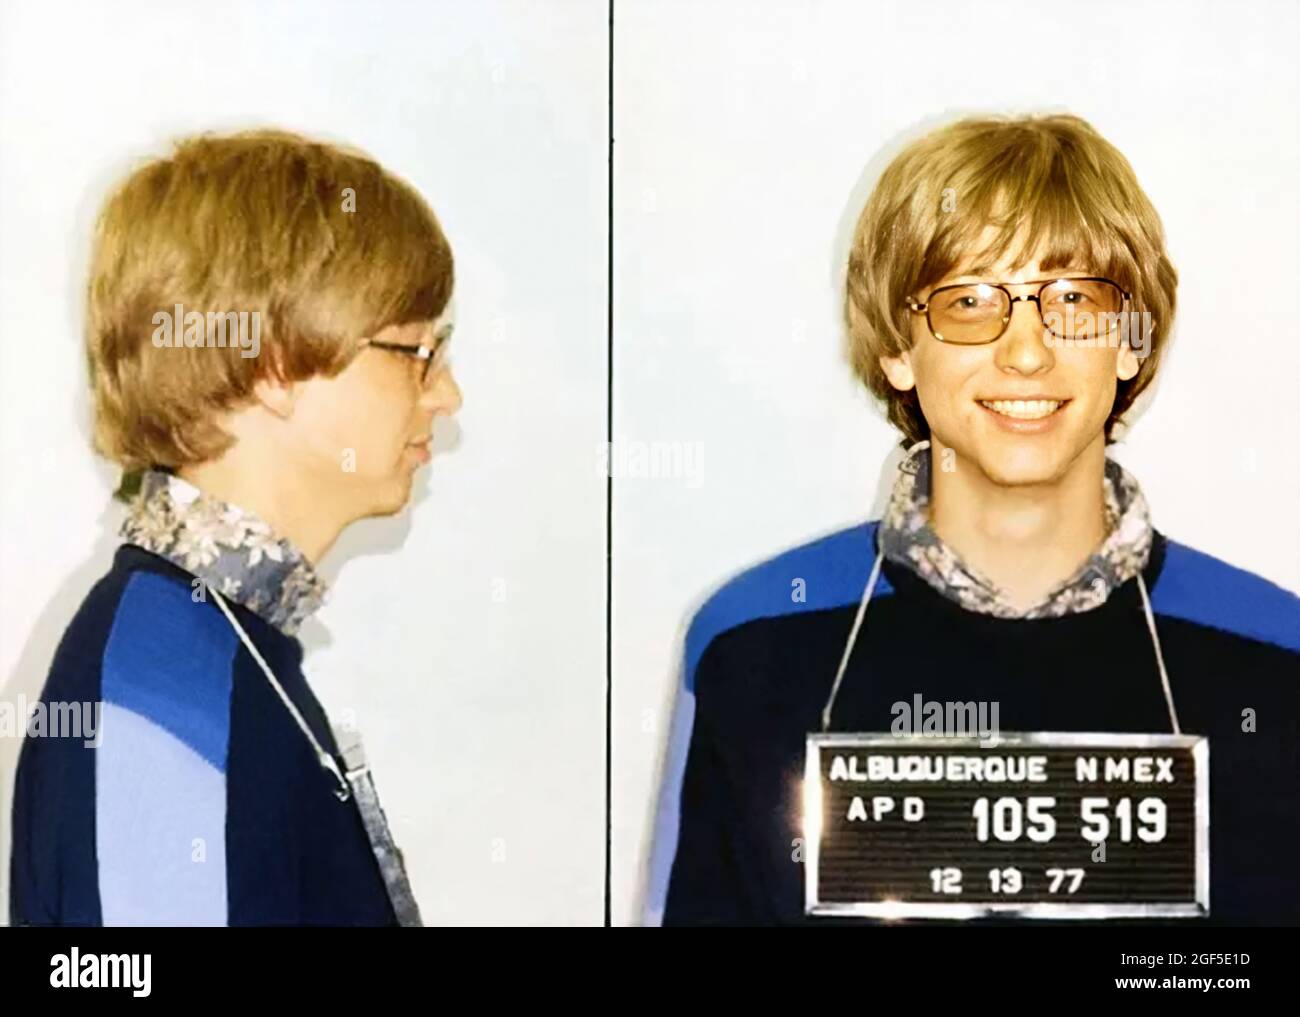 1977 , 13 december , Albuquerque , New Mexico , USA :  Mug shot of  american Microsoft inventor BILL GATES ( born in Seattle, 28 october 1955 ), aged 21, arrested for speeding with car , for driving without a license and not stopping at a stop sign . Unknown photographer by Albuquerque New Mexico Police Department . - MUG-SHOT - MUGSHOT - FOTO SEGNALETICA - portrait - ritratto - smile - sorriso - occhiali da vista - lens - COMPUTER - INVENTORE - eccesso di velocità - infrazione - MAGNATE - TYCOON - RICCO - RICH --- Archivio GBB Stock Photo